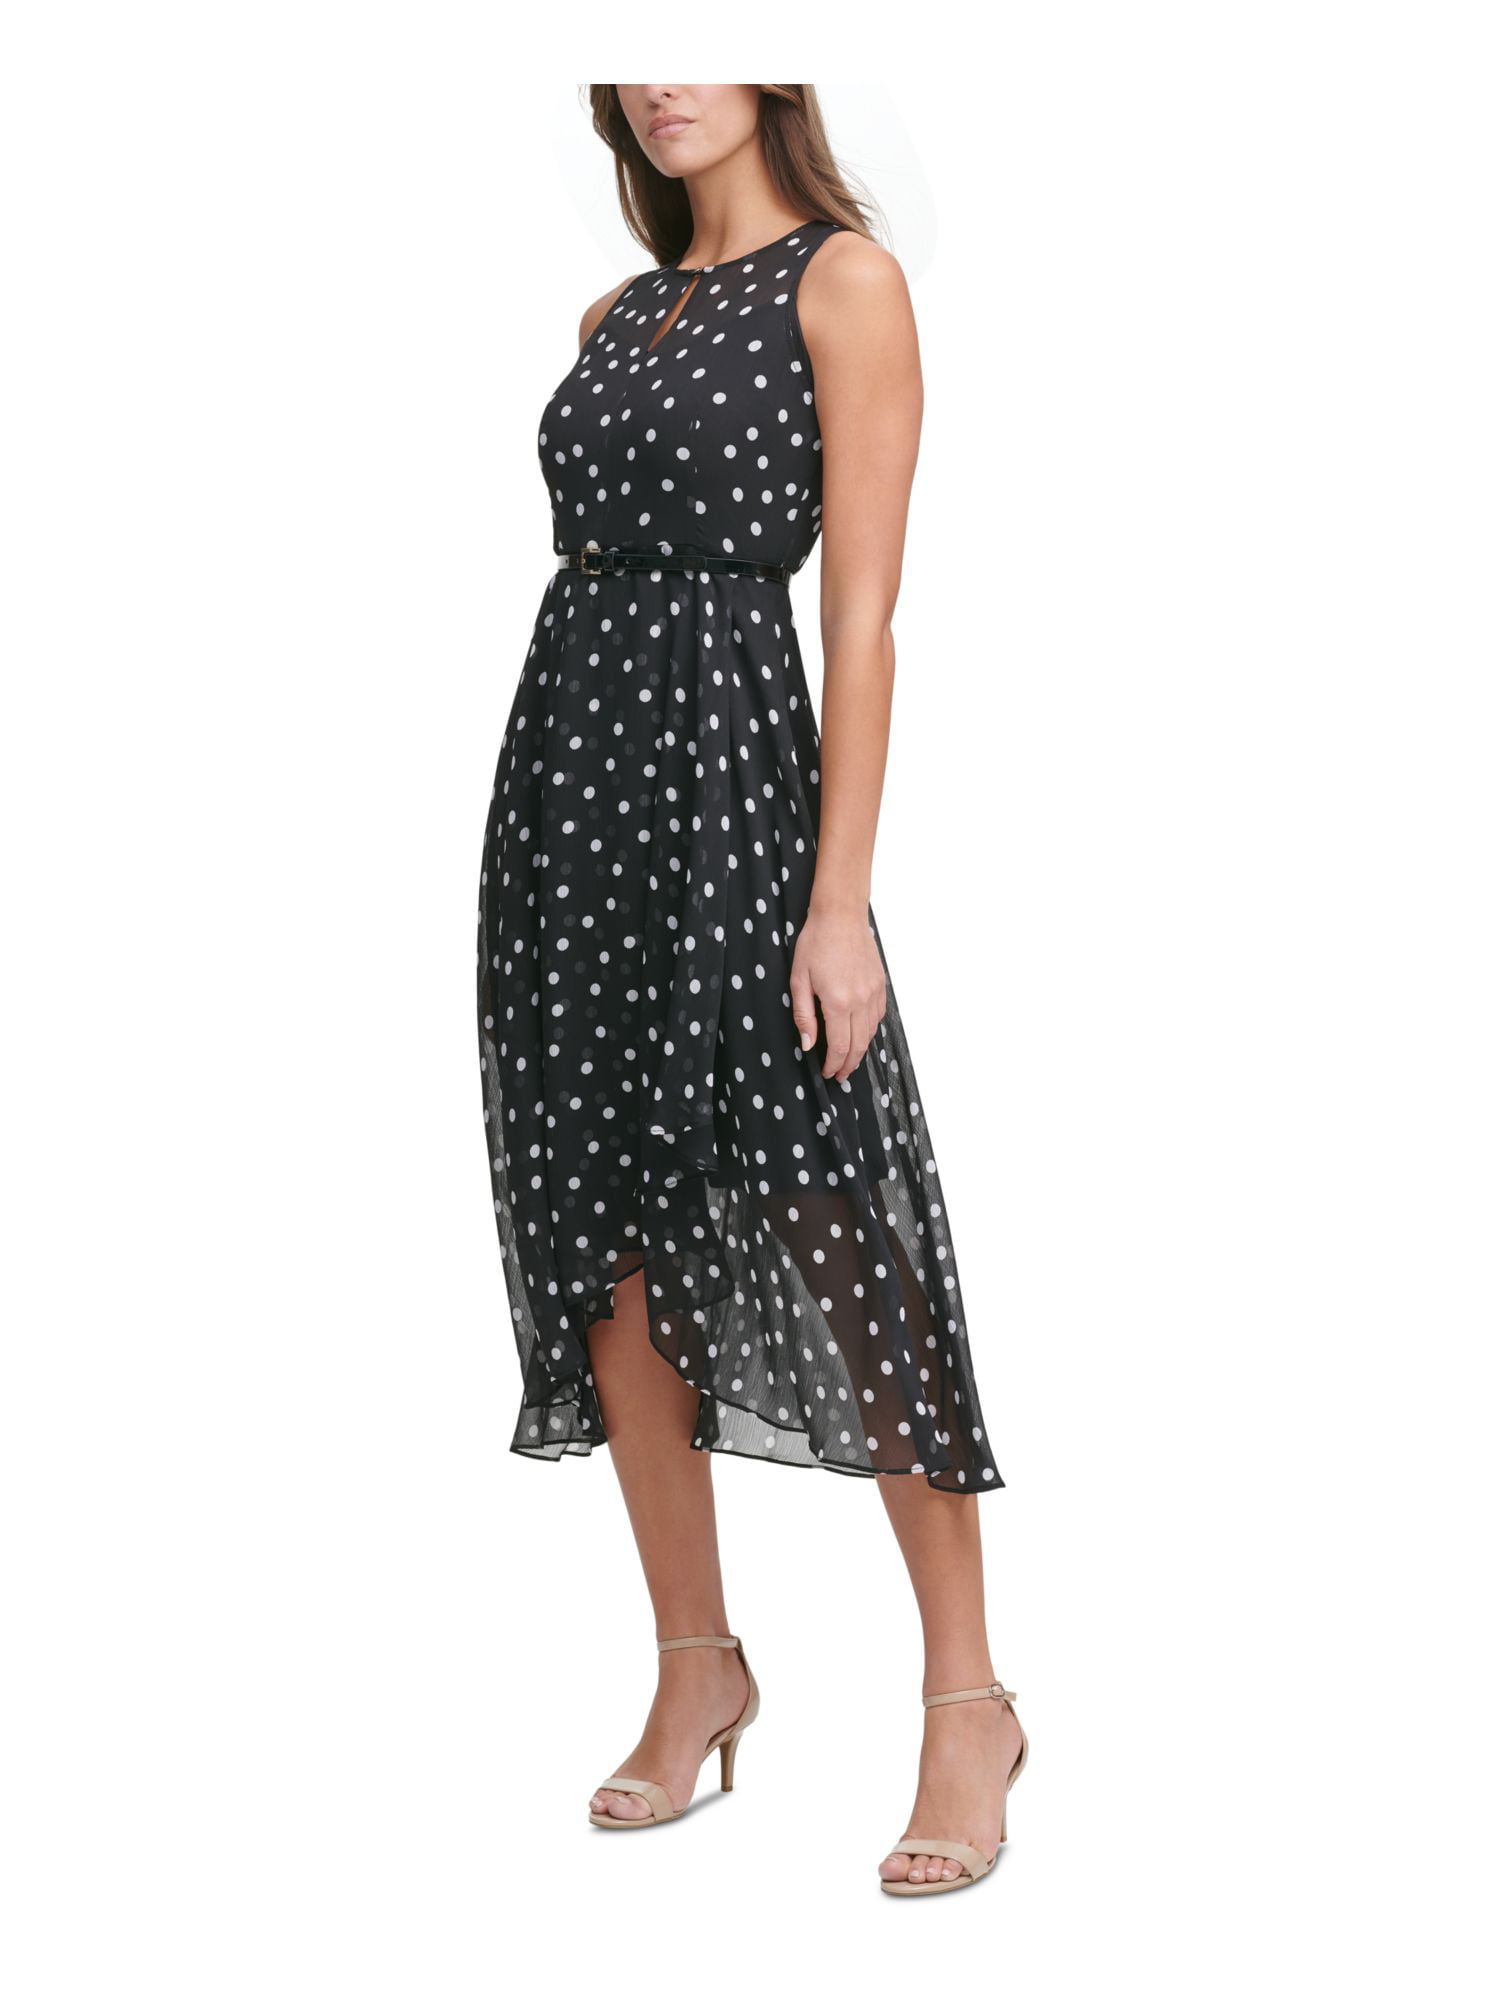 TOMMY HILFIGER Womens Black Zippered Cut Out Crossover Hi-lo Hem Sheer  Lined Polka Dot Sleeveless Round Neck Midi Party Fit + Flare Dress 12